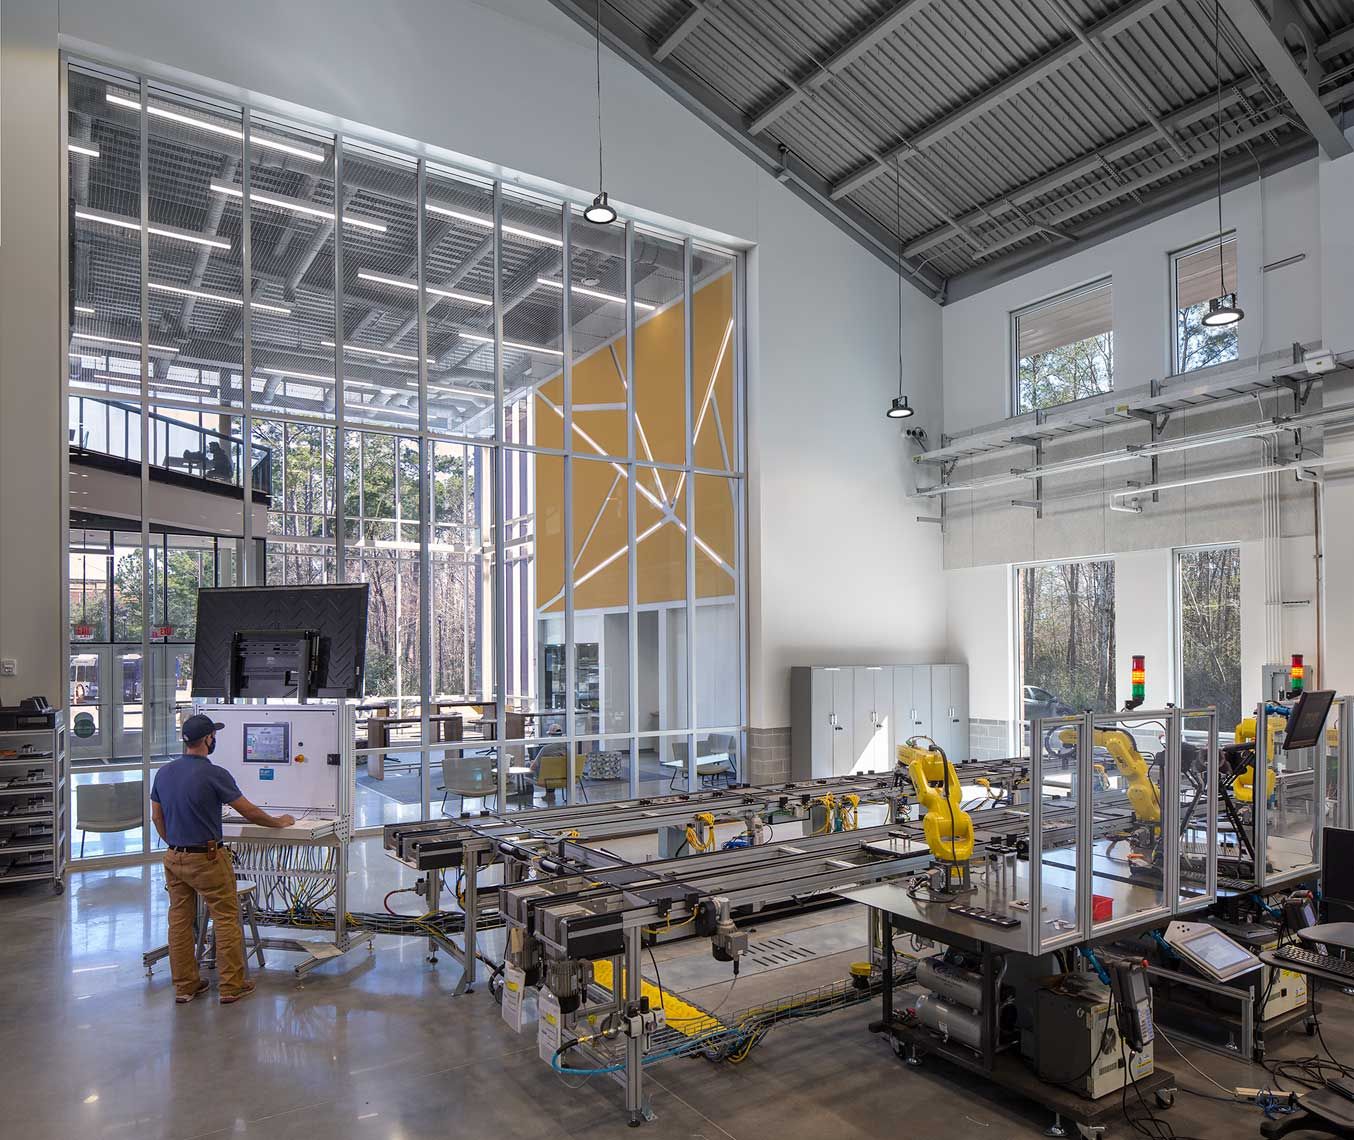 A view of the sunlight pouring into the robotic manufacturing facility and lobby